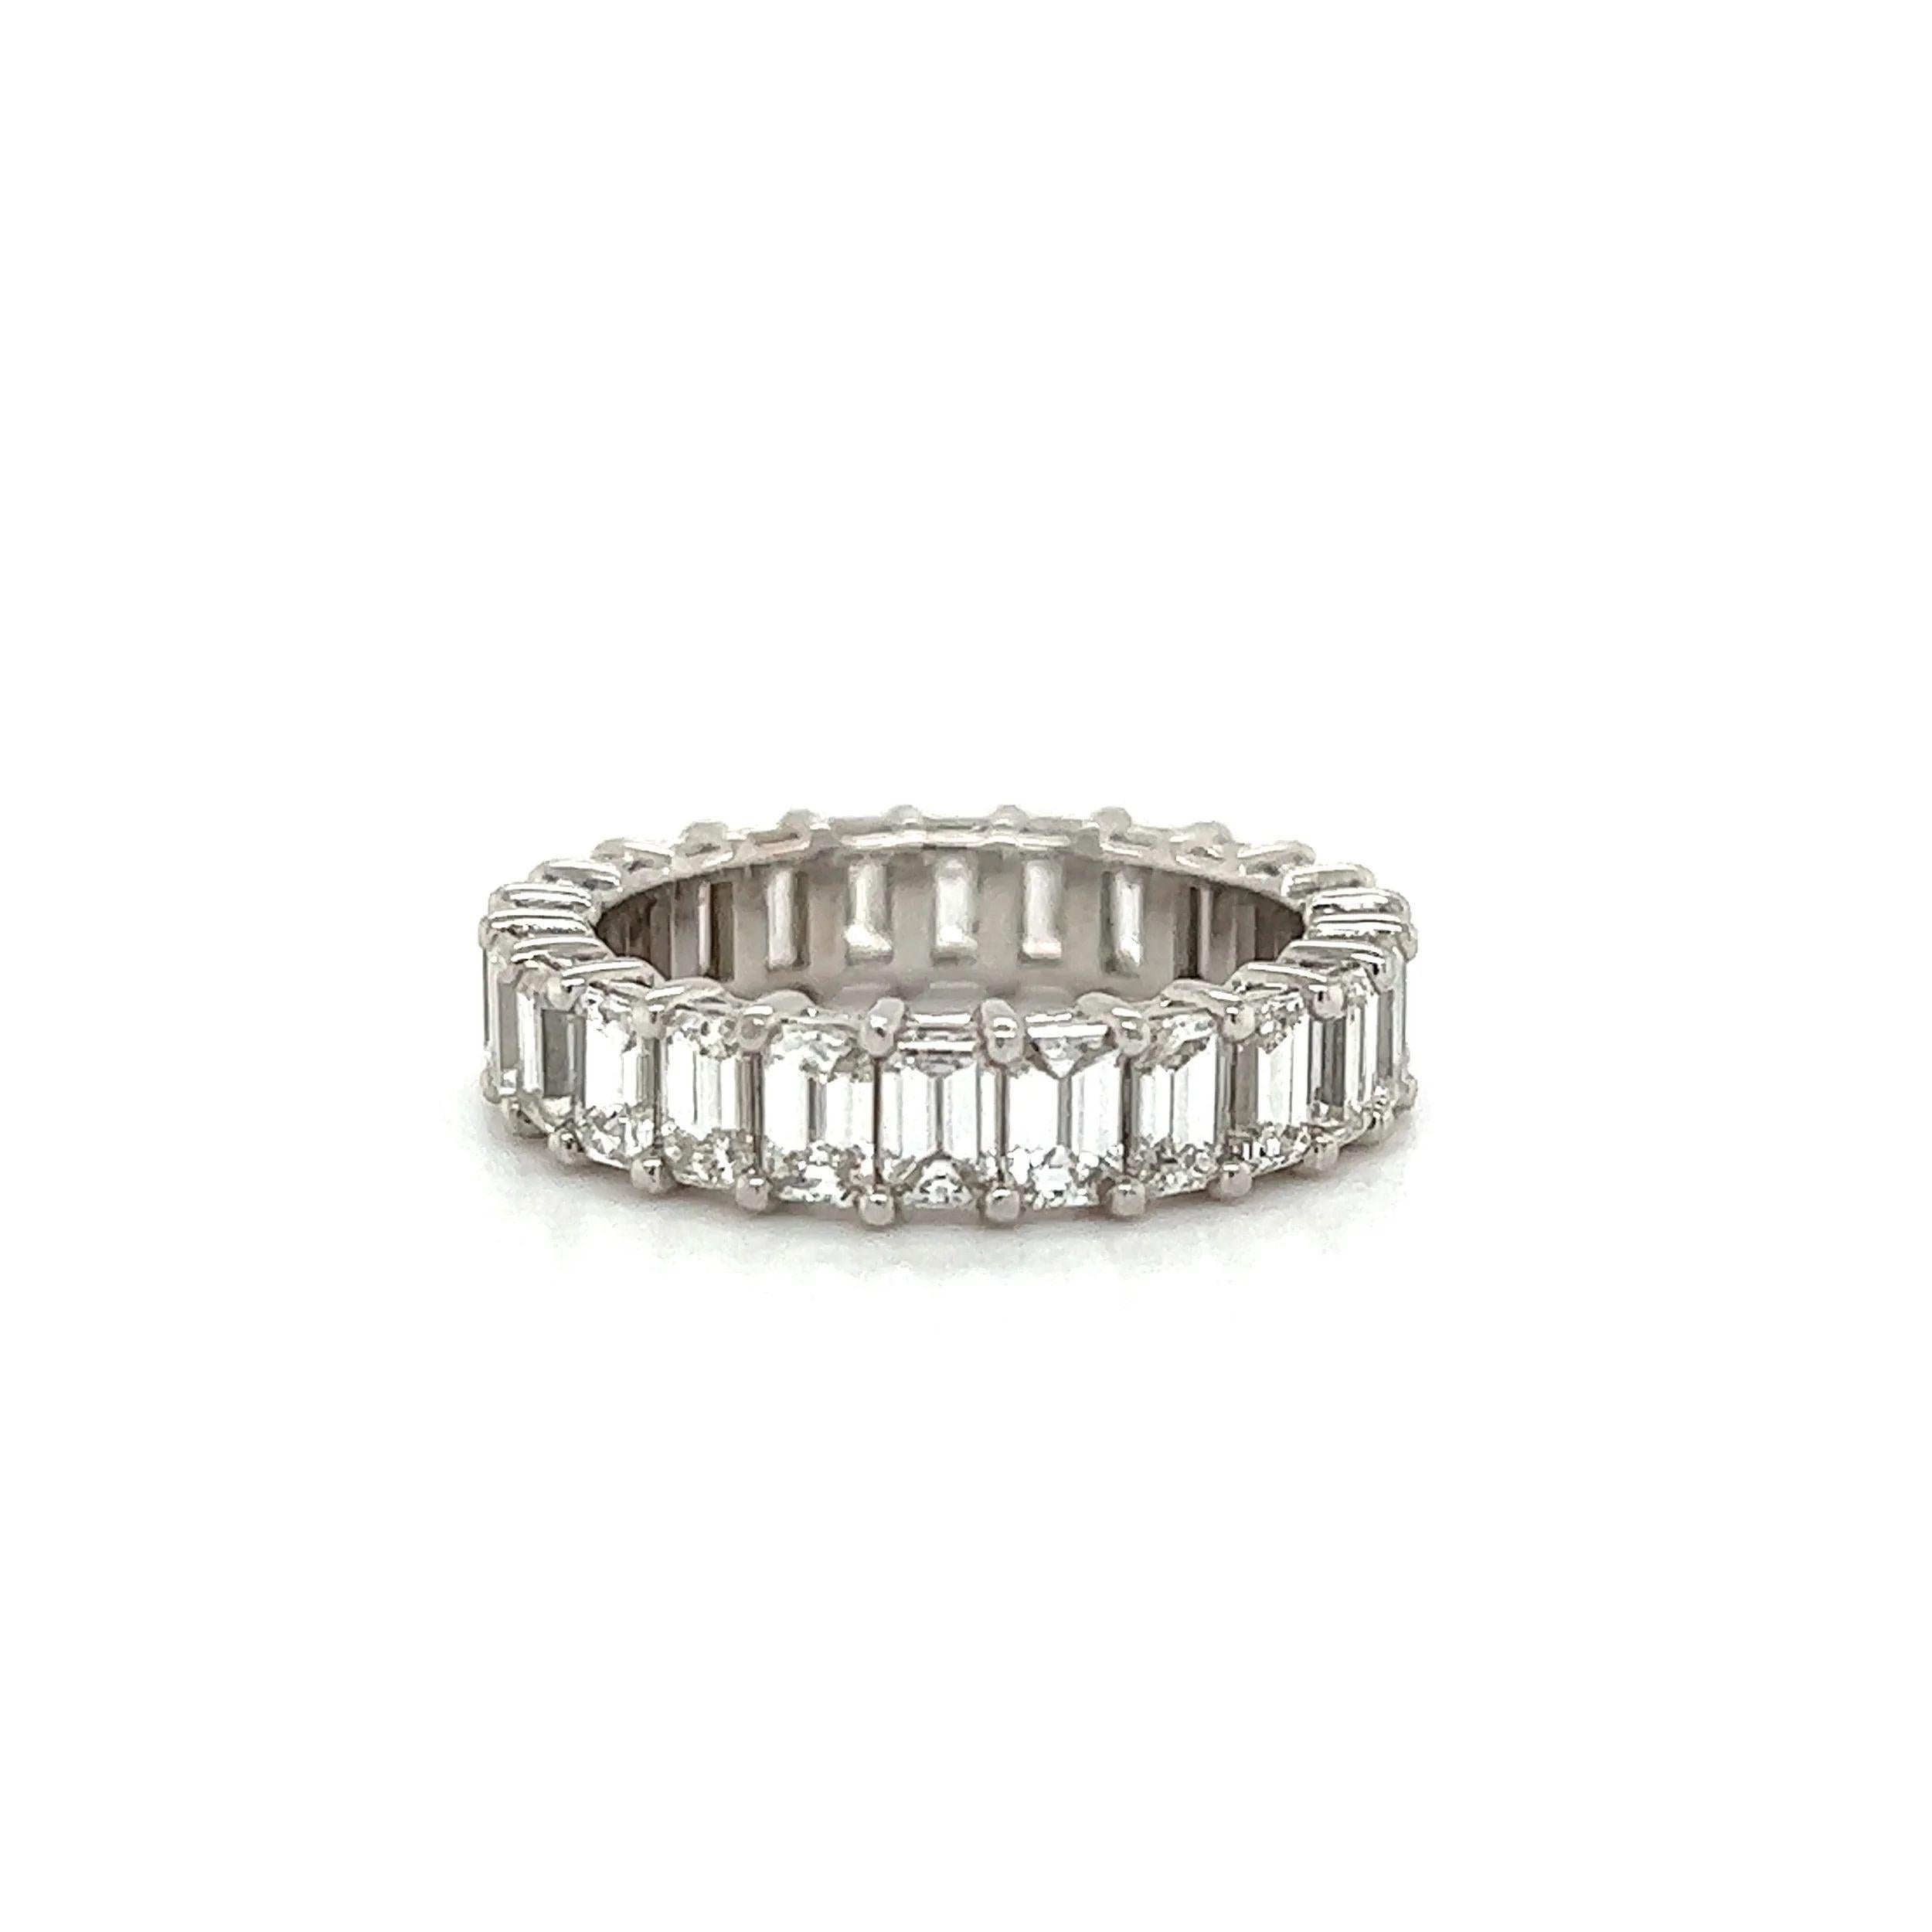 Simply Beautiful! Finely detailed Diamond Eternity Band Ring. Securely nestled Hand set 44 Emerald Cut Diamonds, weighing approx. 4.41tcw; G-VS Quality. Hand crafted 18K White Gold mounting. Ideal worn alone or as an alternative Engagement ring or